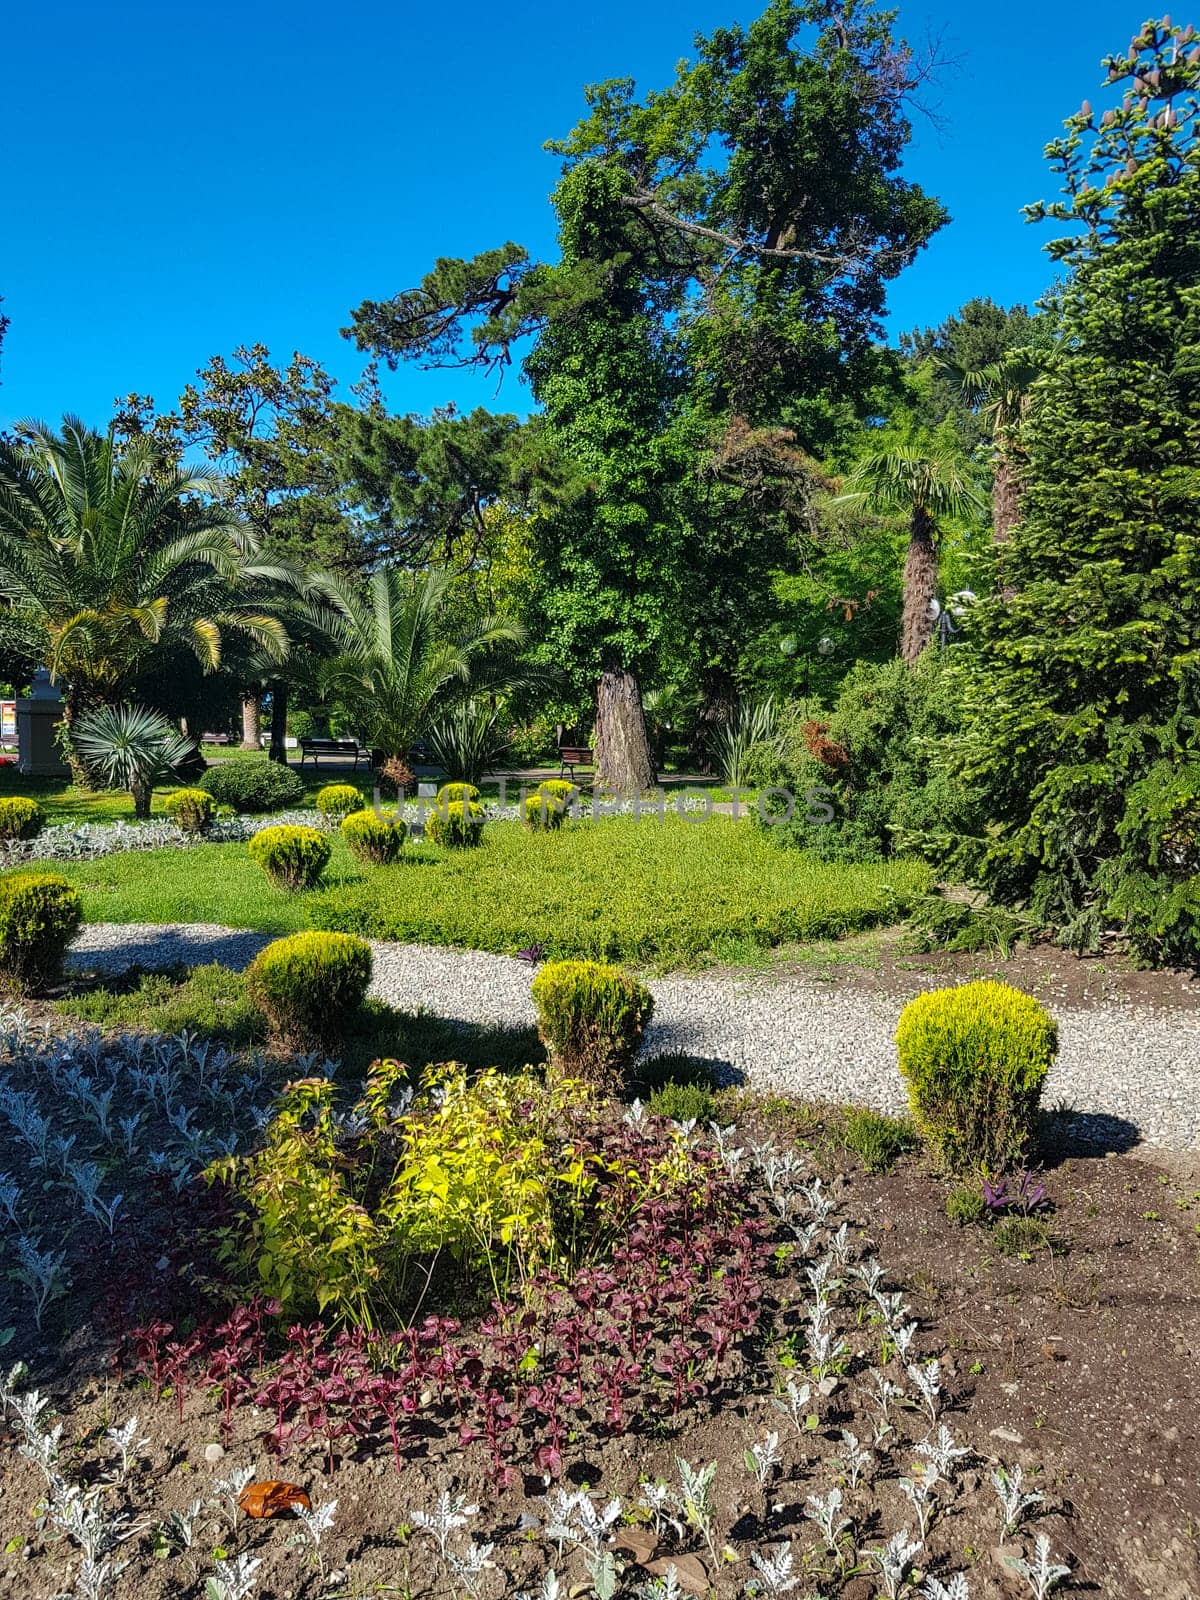 A beautiful huge garden park with flowers growing on round flower beds in the middle of garden paths, against a background of tropical palm trees, bright sunlight.